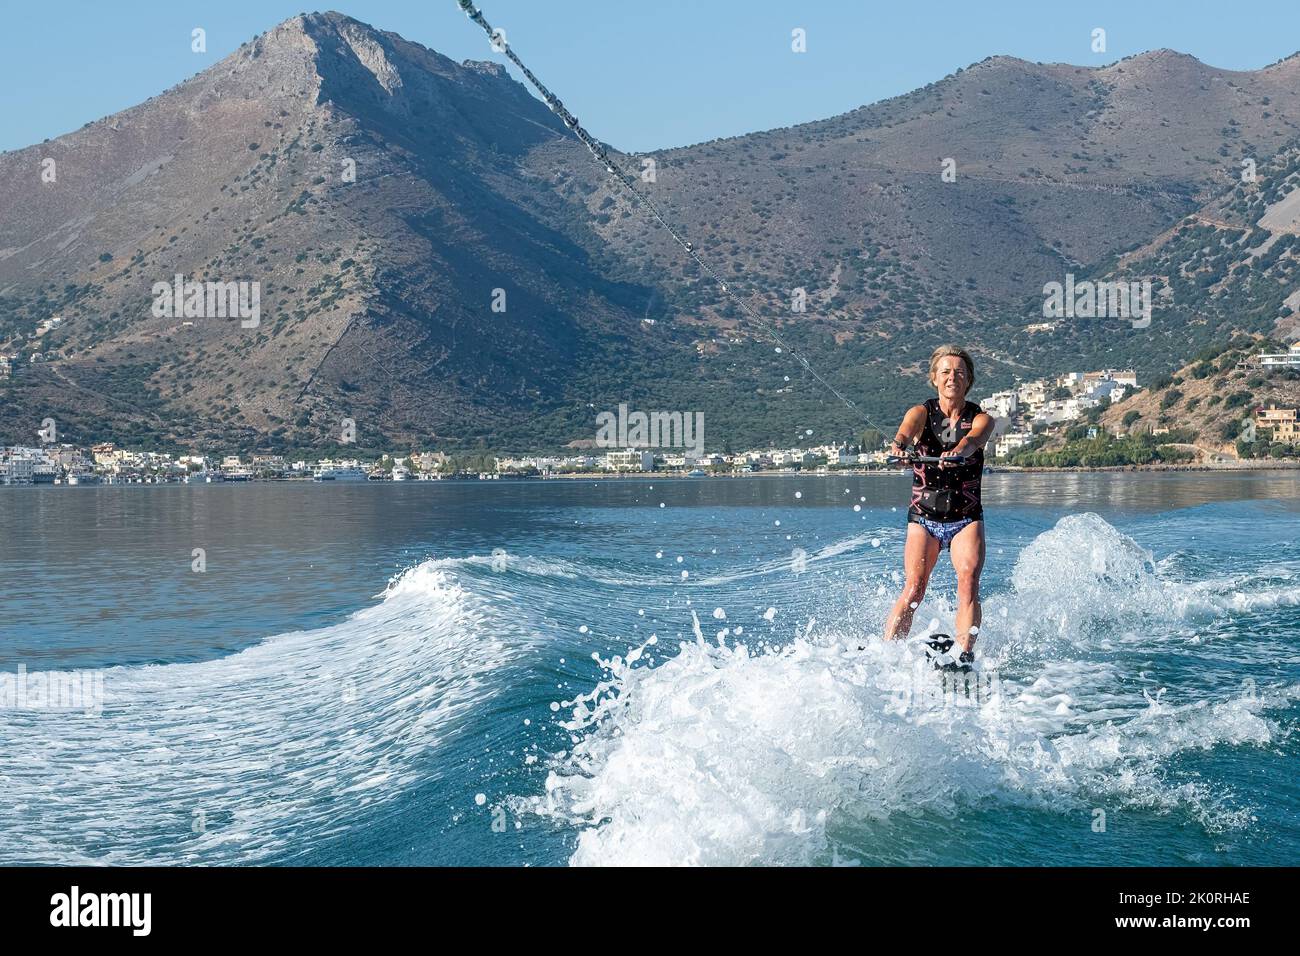 Holiday water skiing in Elounda Bay, Crete. A naturally sheltered scenic bay that provides an ideal waterskiing location. Stock Photo